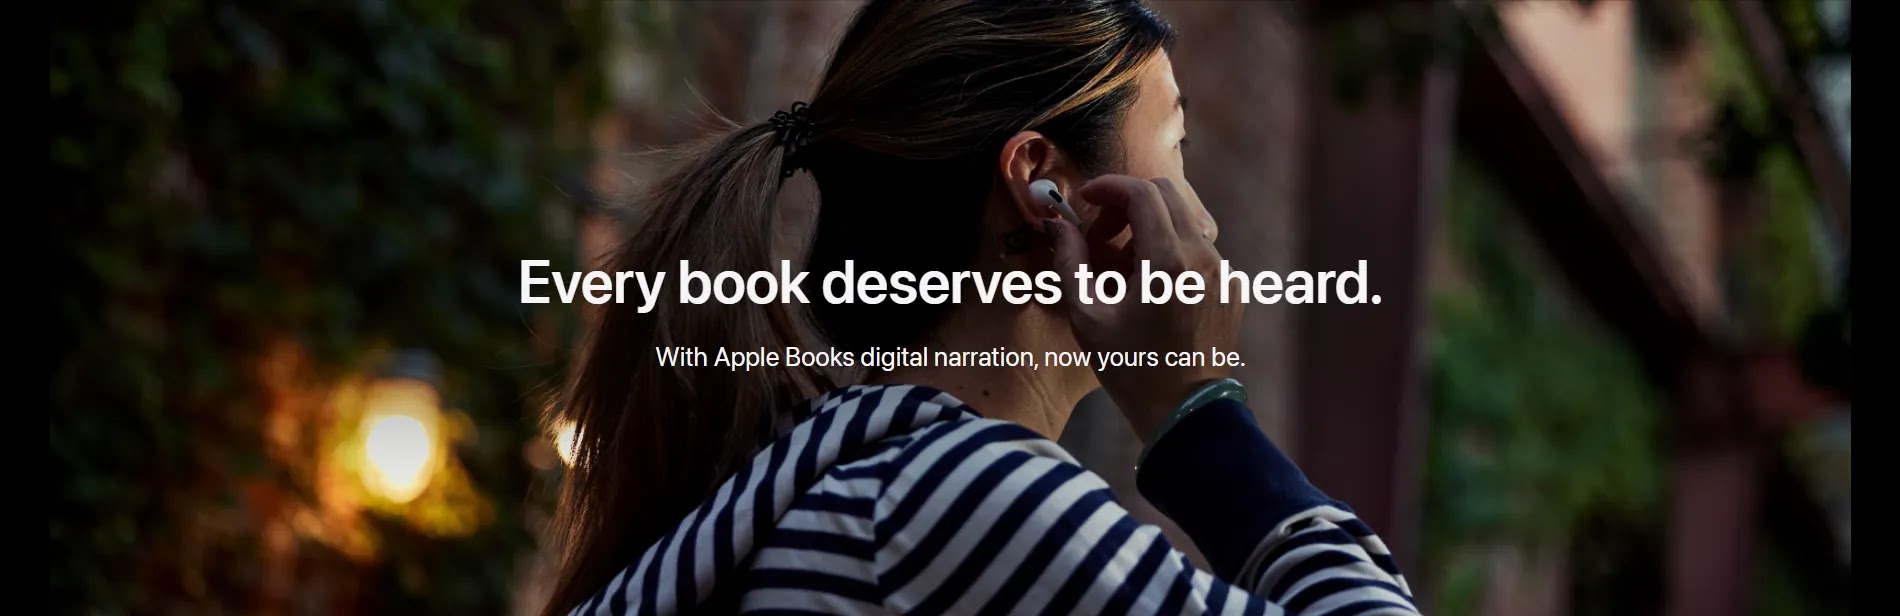 Screenshot of a page on Apple's website promoting digital narration for audiobooks